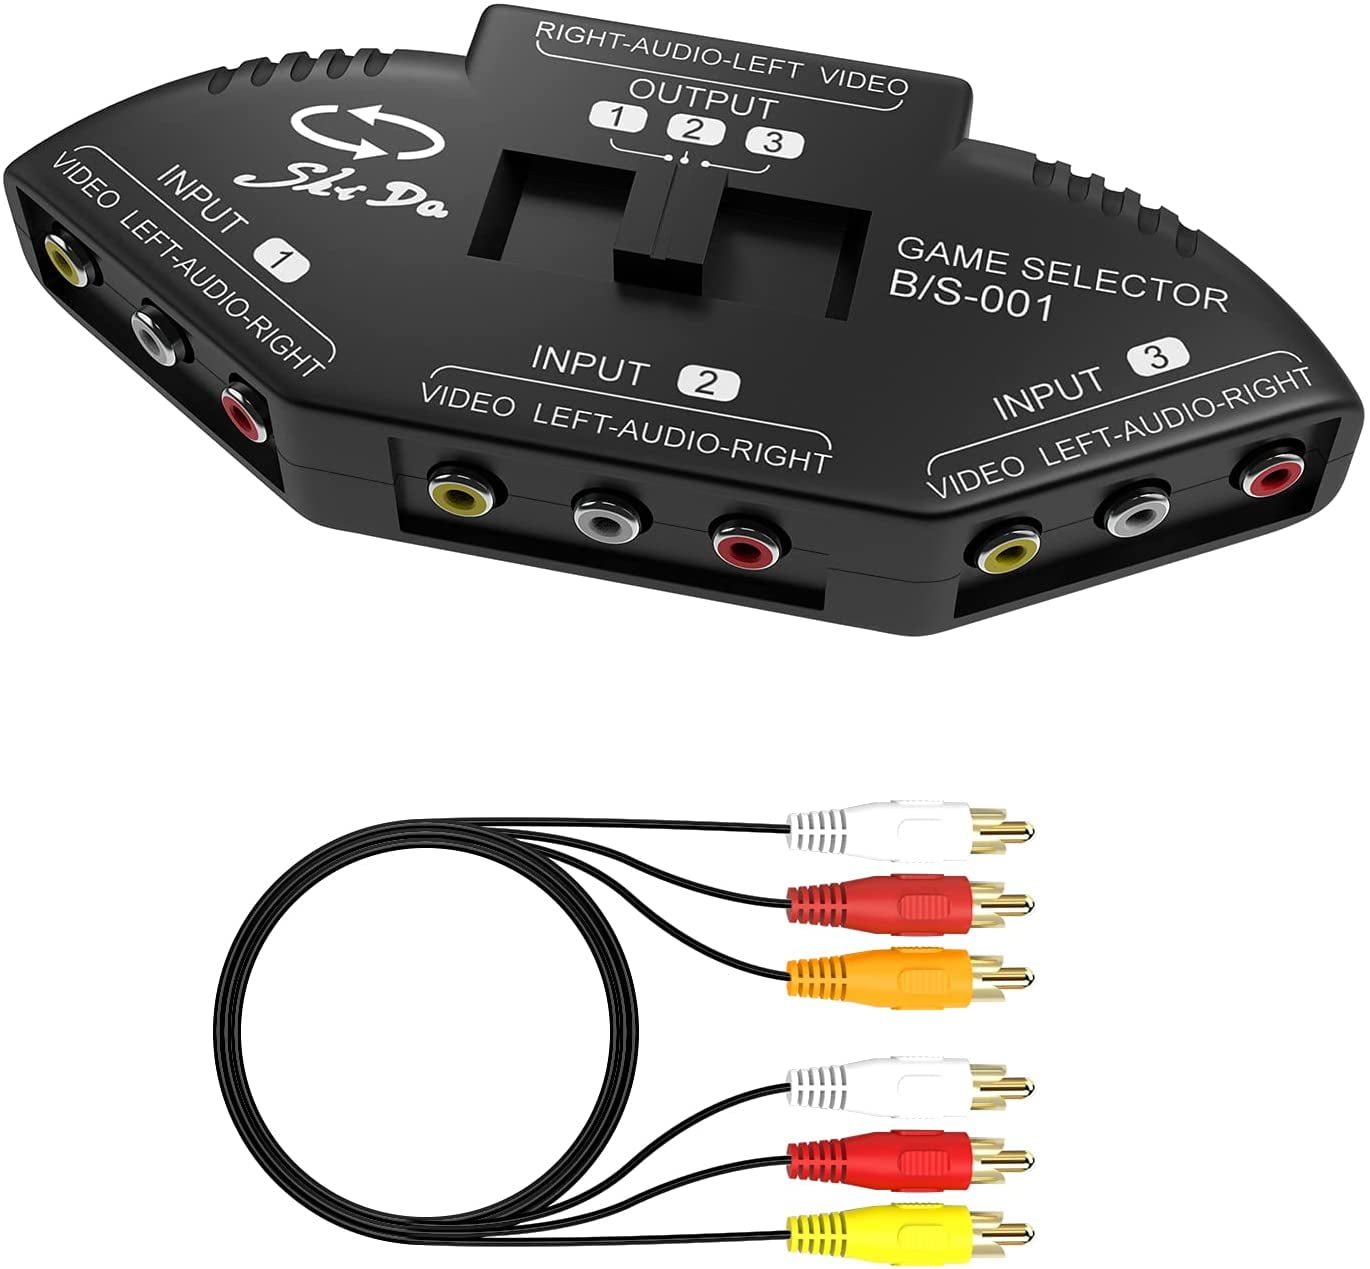 Rybozen 3-Way Audio Video AV RCA Switch Selector Box Splitter for Xbox,  DVD, VCR, PS2 and Wii with AV Cable